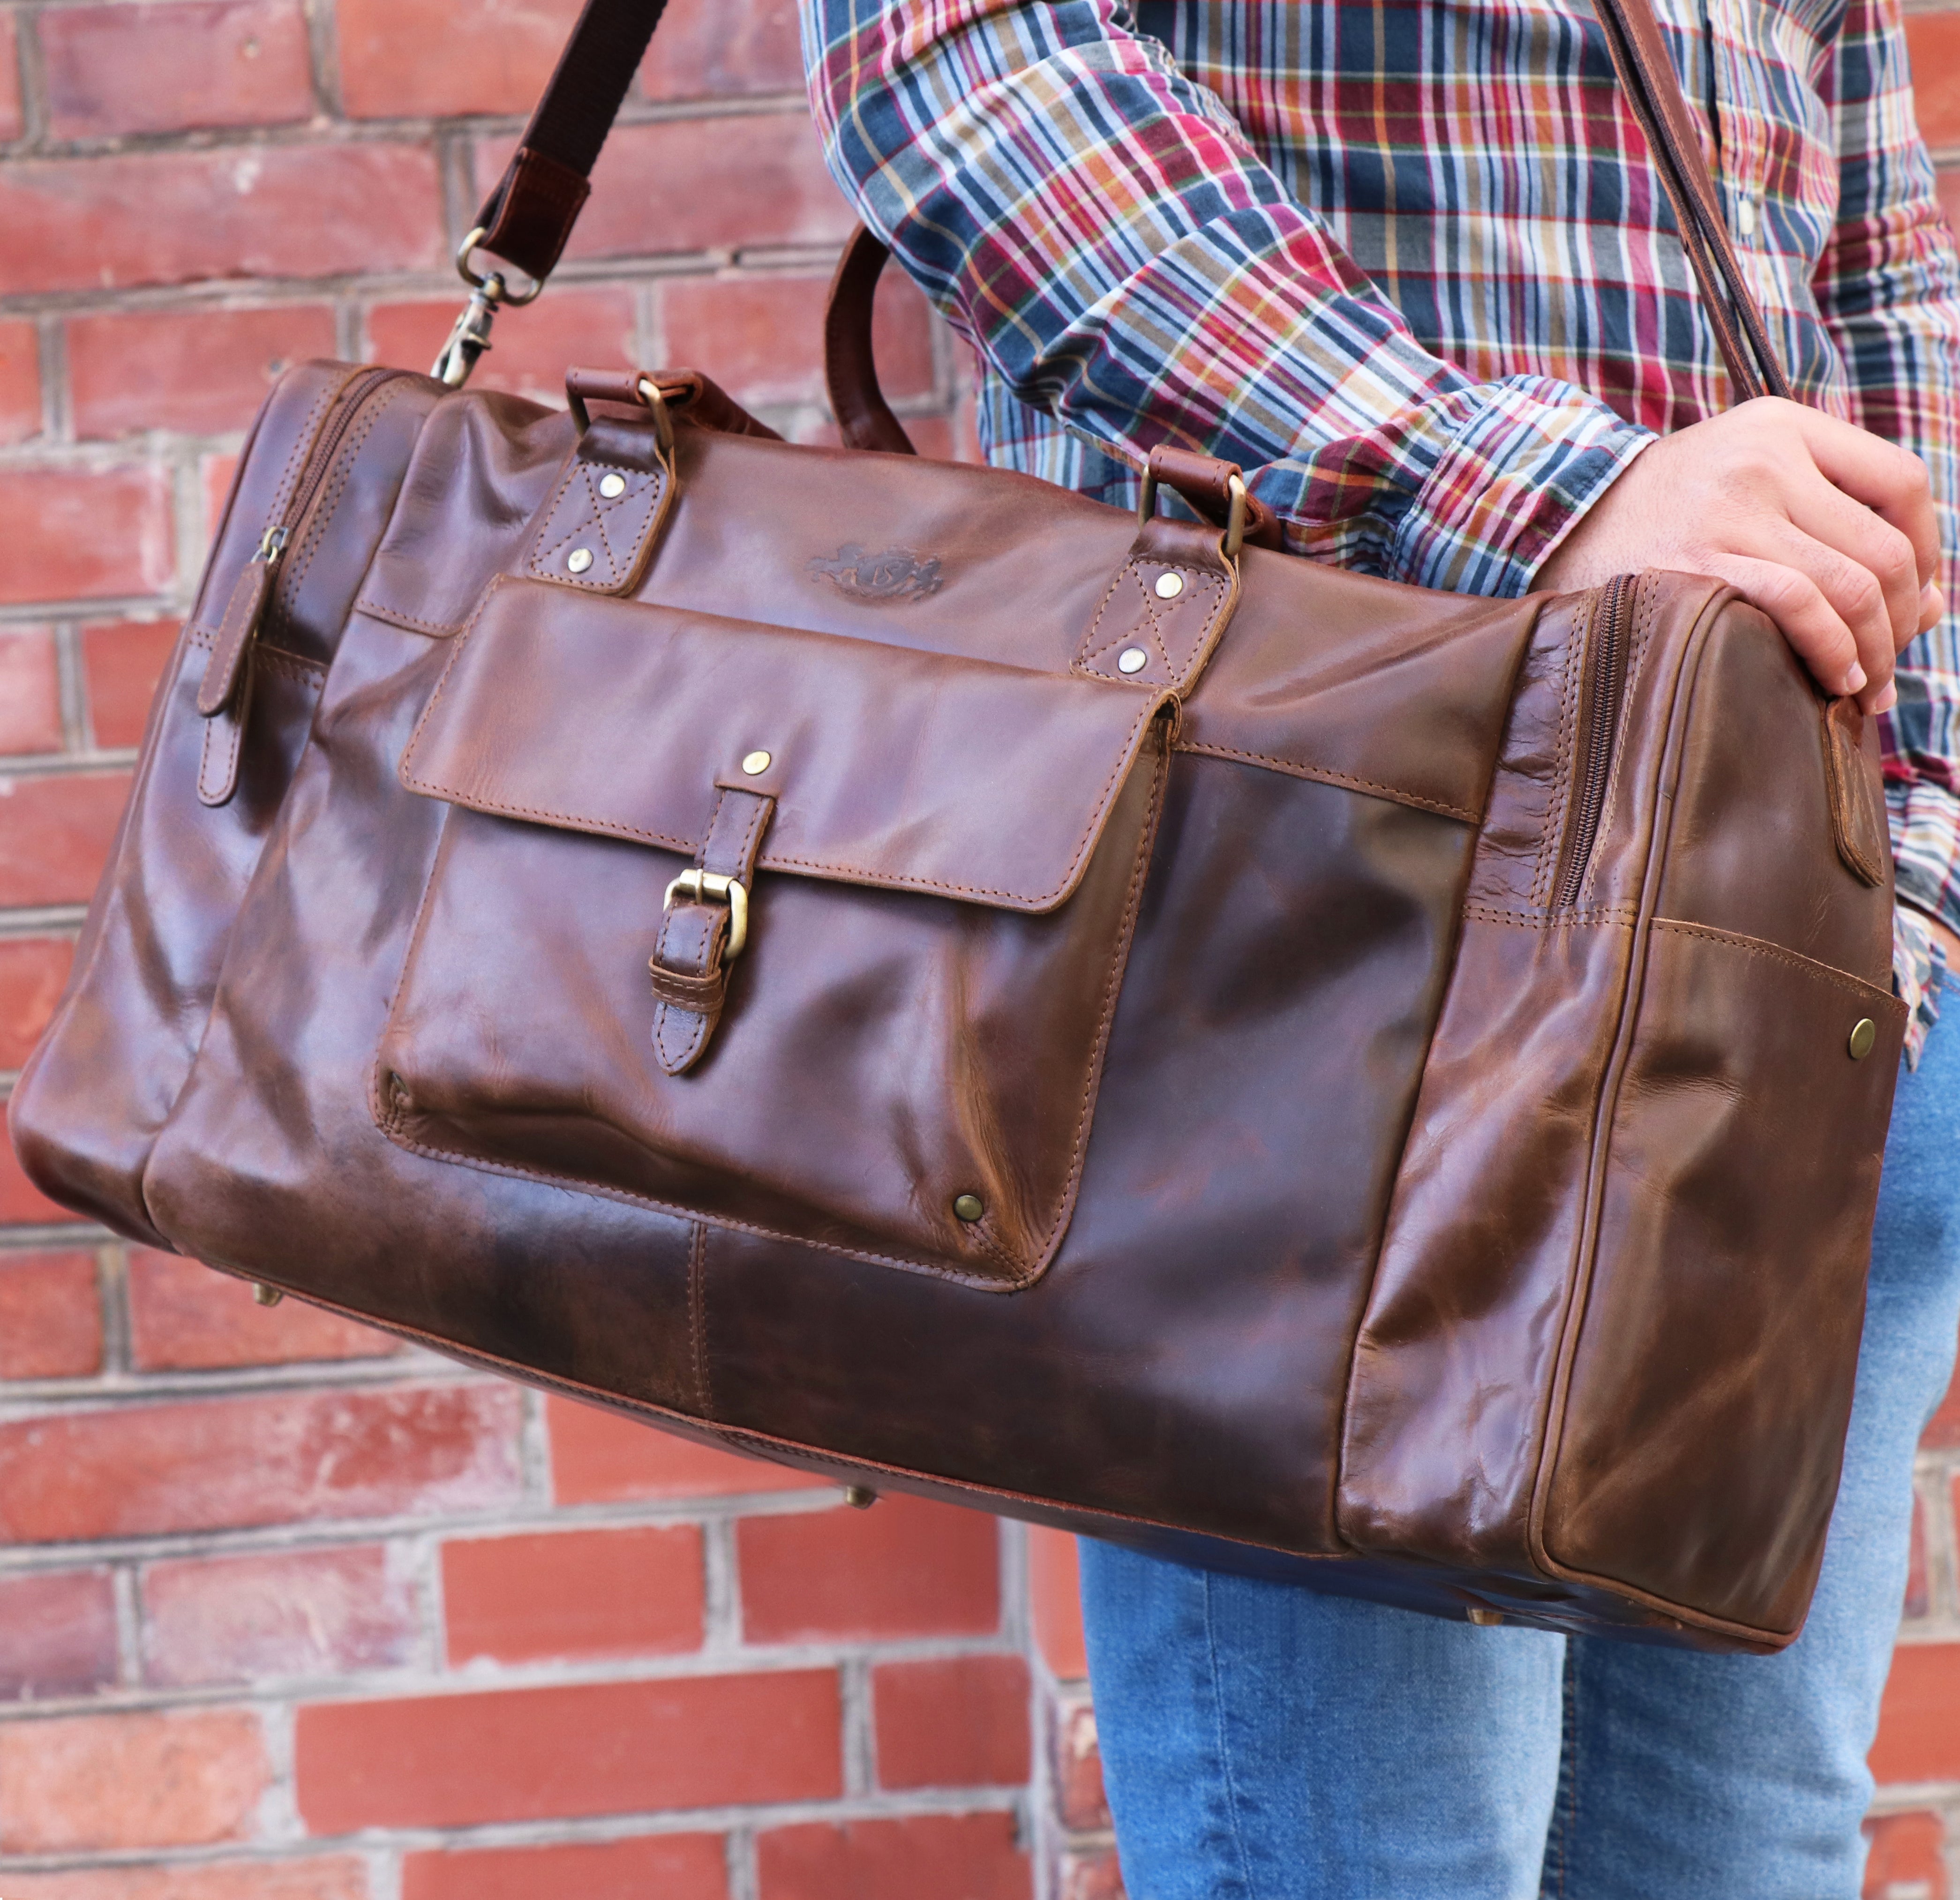 Travel bag with address tag YALE natural leather brown-cognac